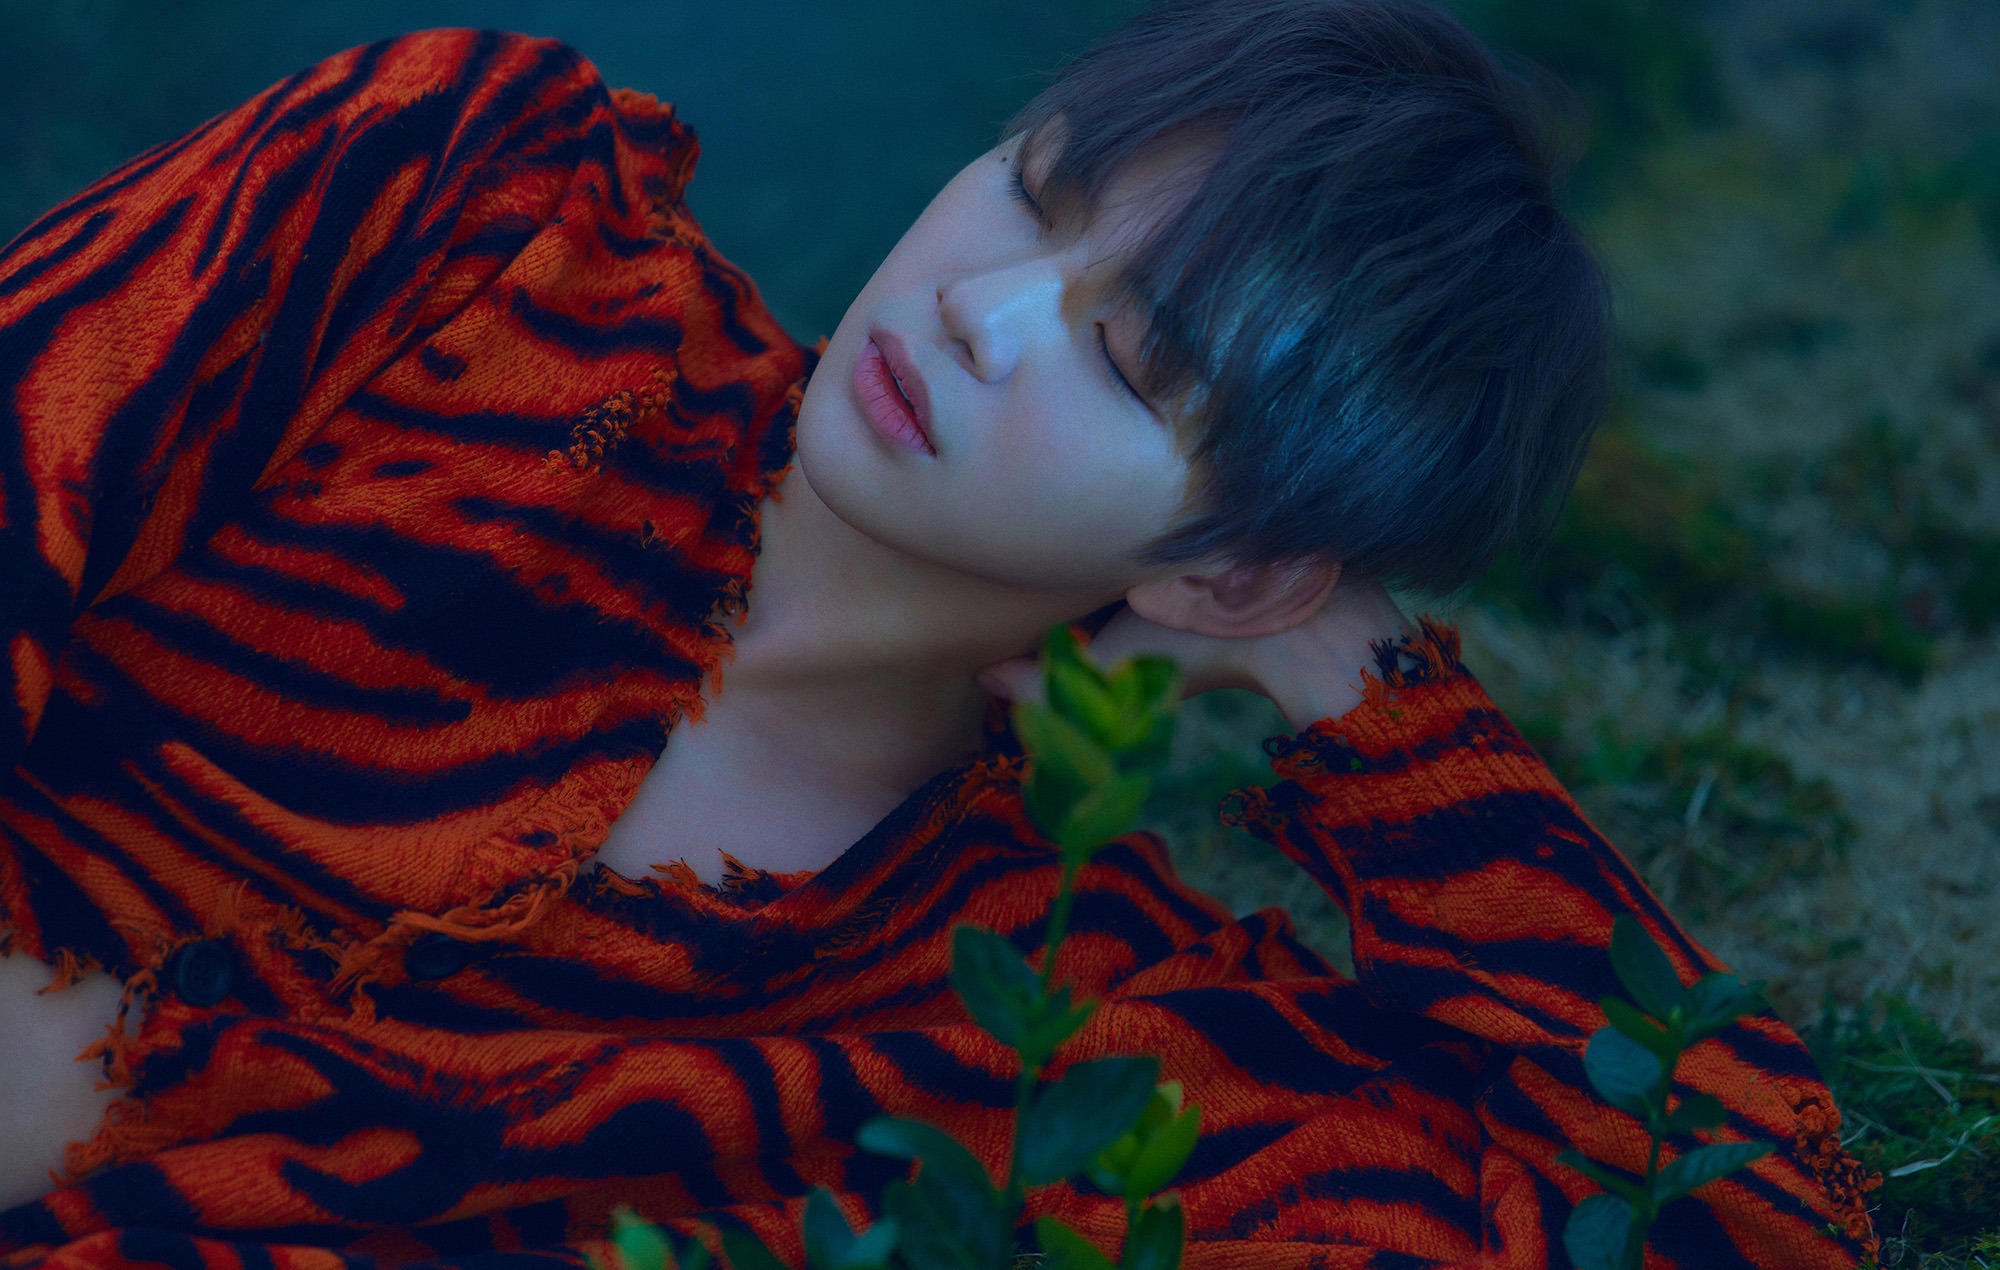 Kang Daniel on vulnerable new mini-album ‘Yellow’: “All I have is myself and my story”